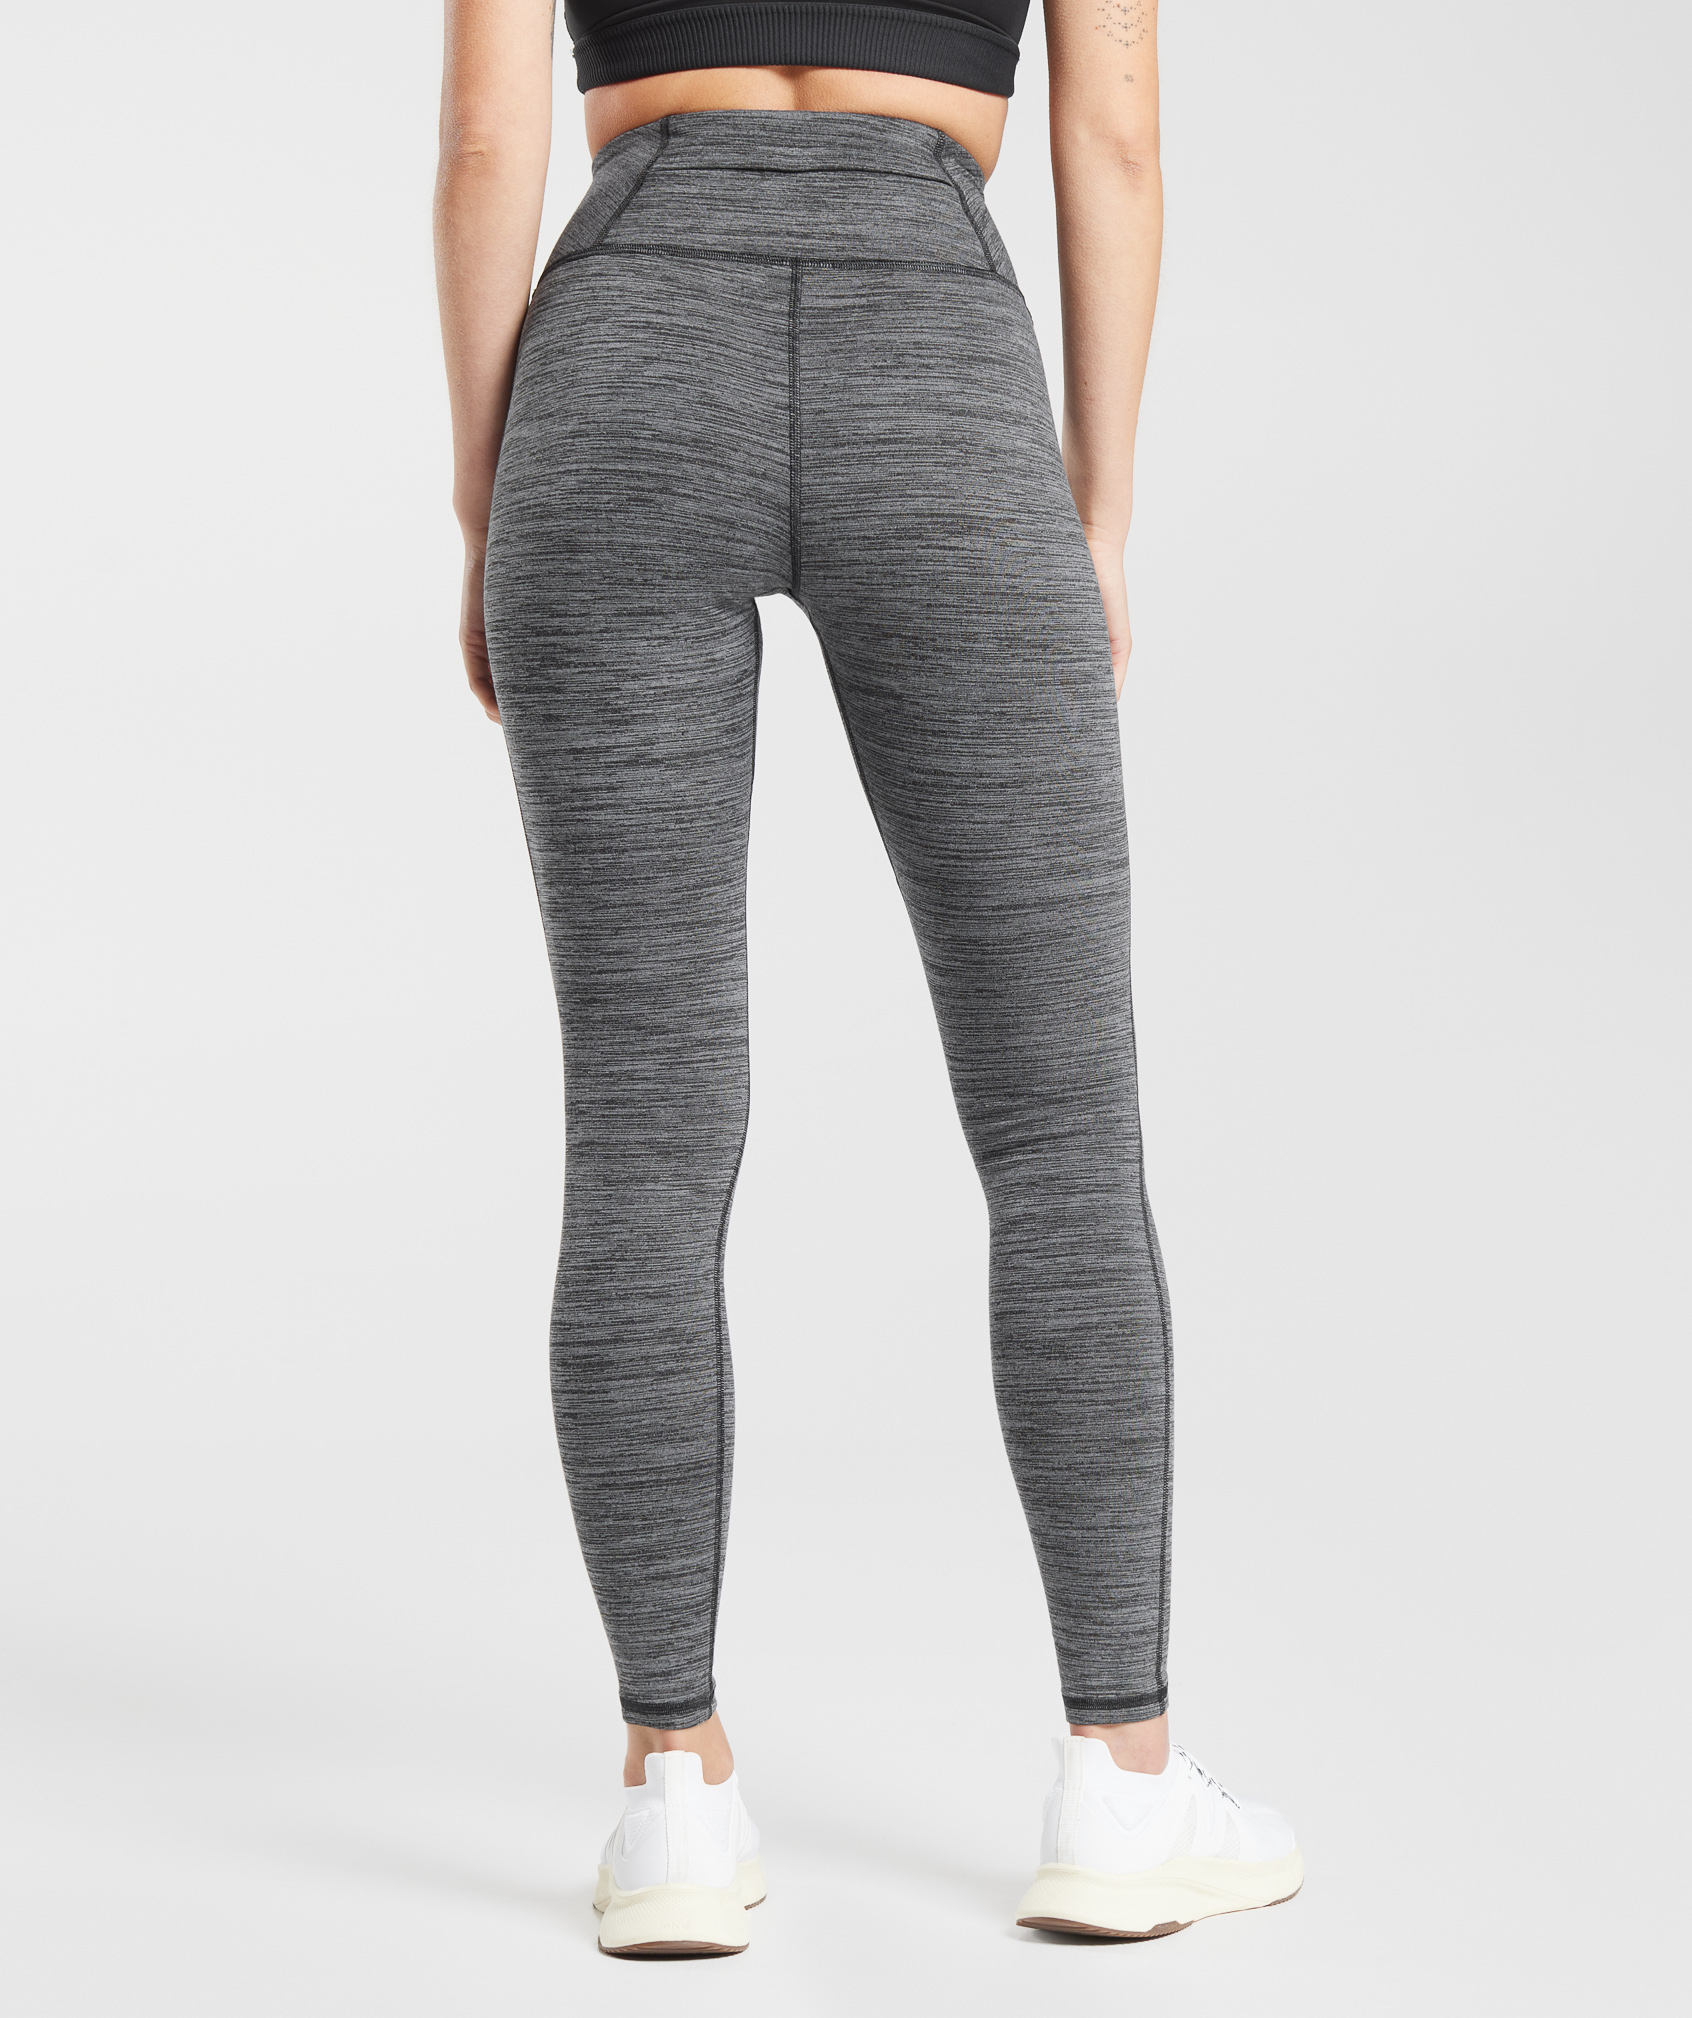 These Fleece-lined Leggings Are Perfect for Lounging and Skiing